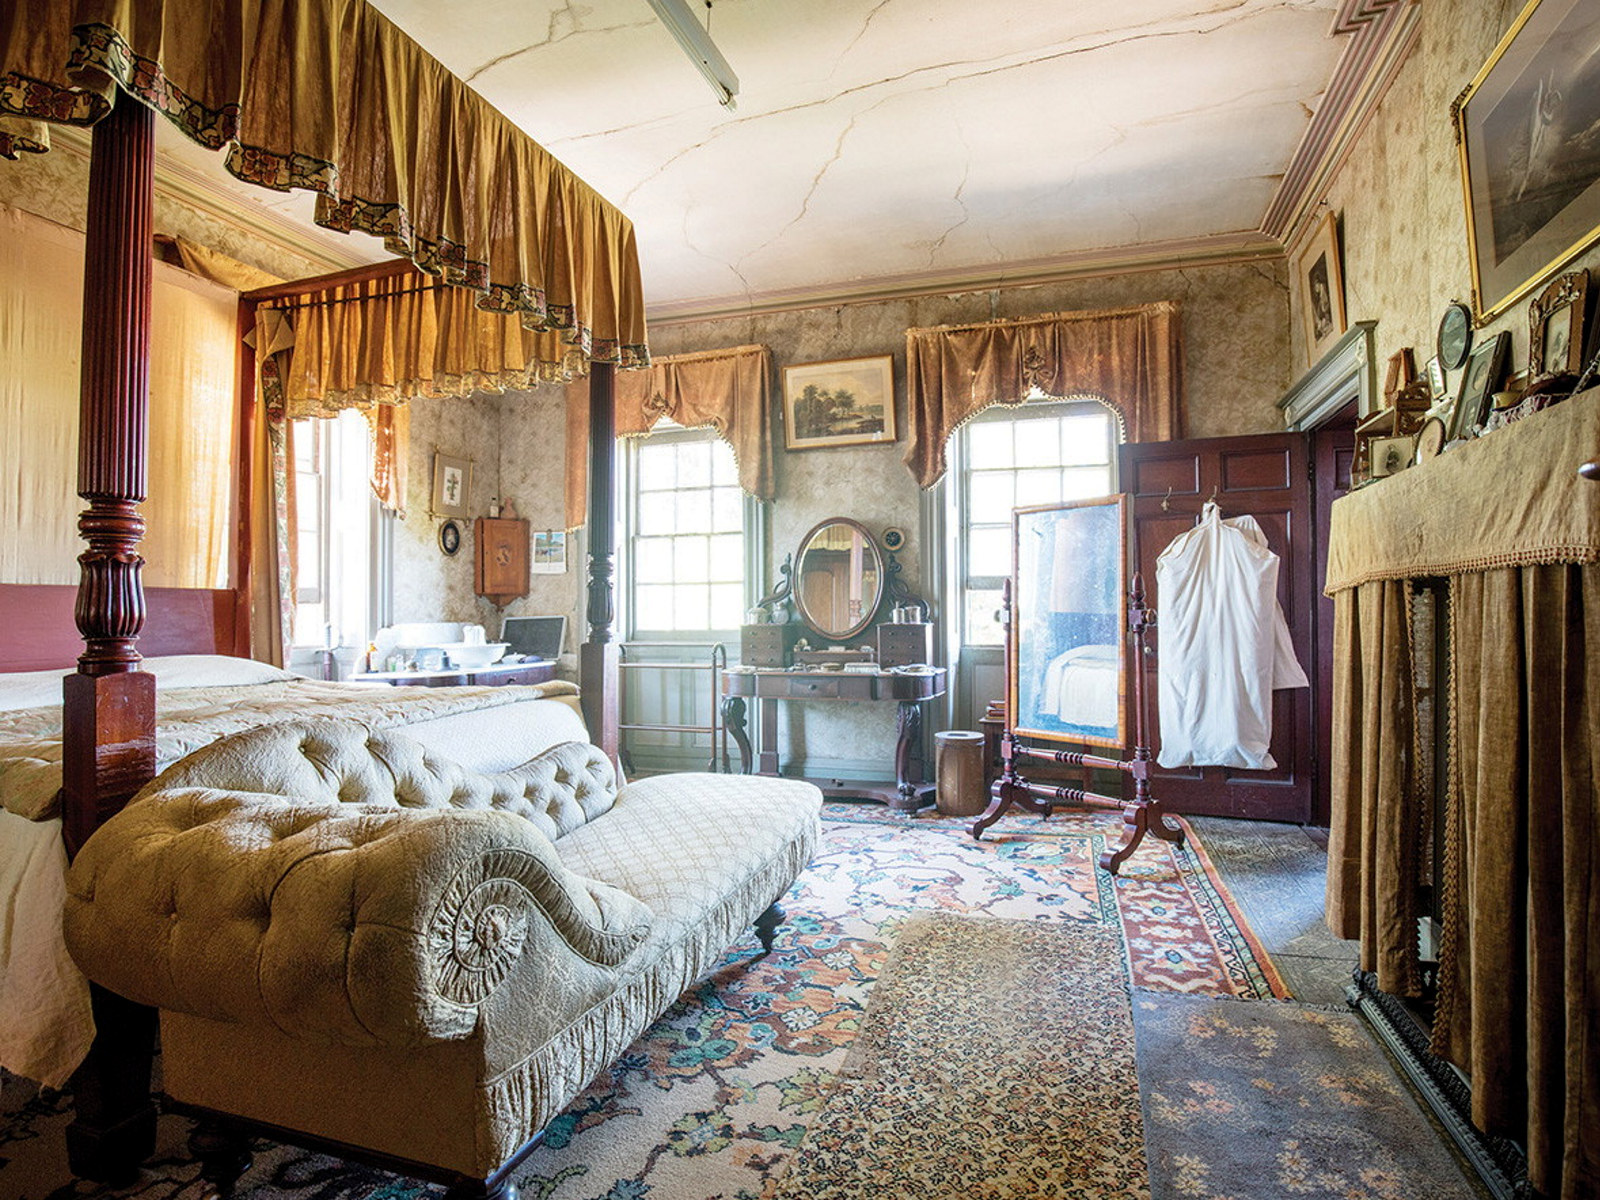 Ornately furnished bedroom with canopied bed and chaise longue to left and windows behind.